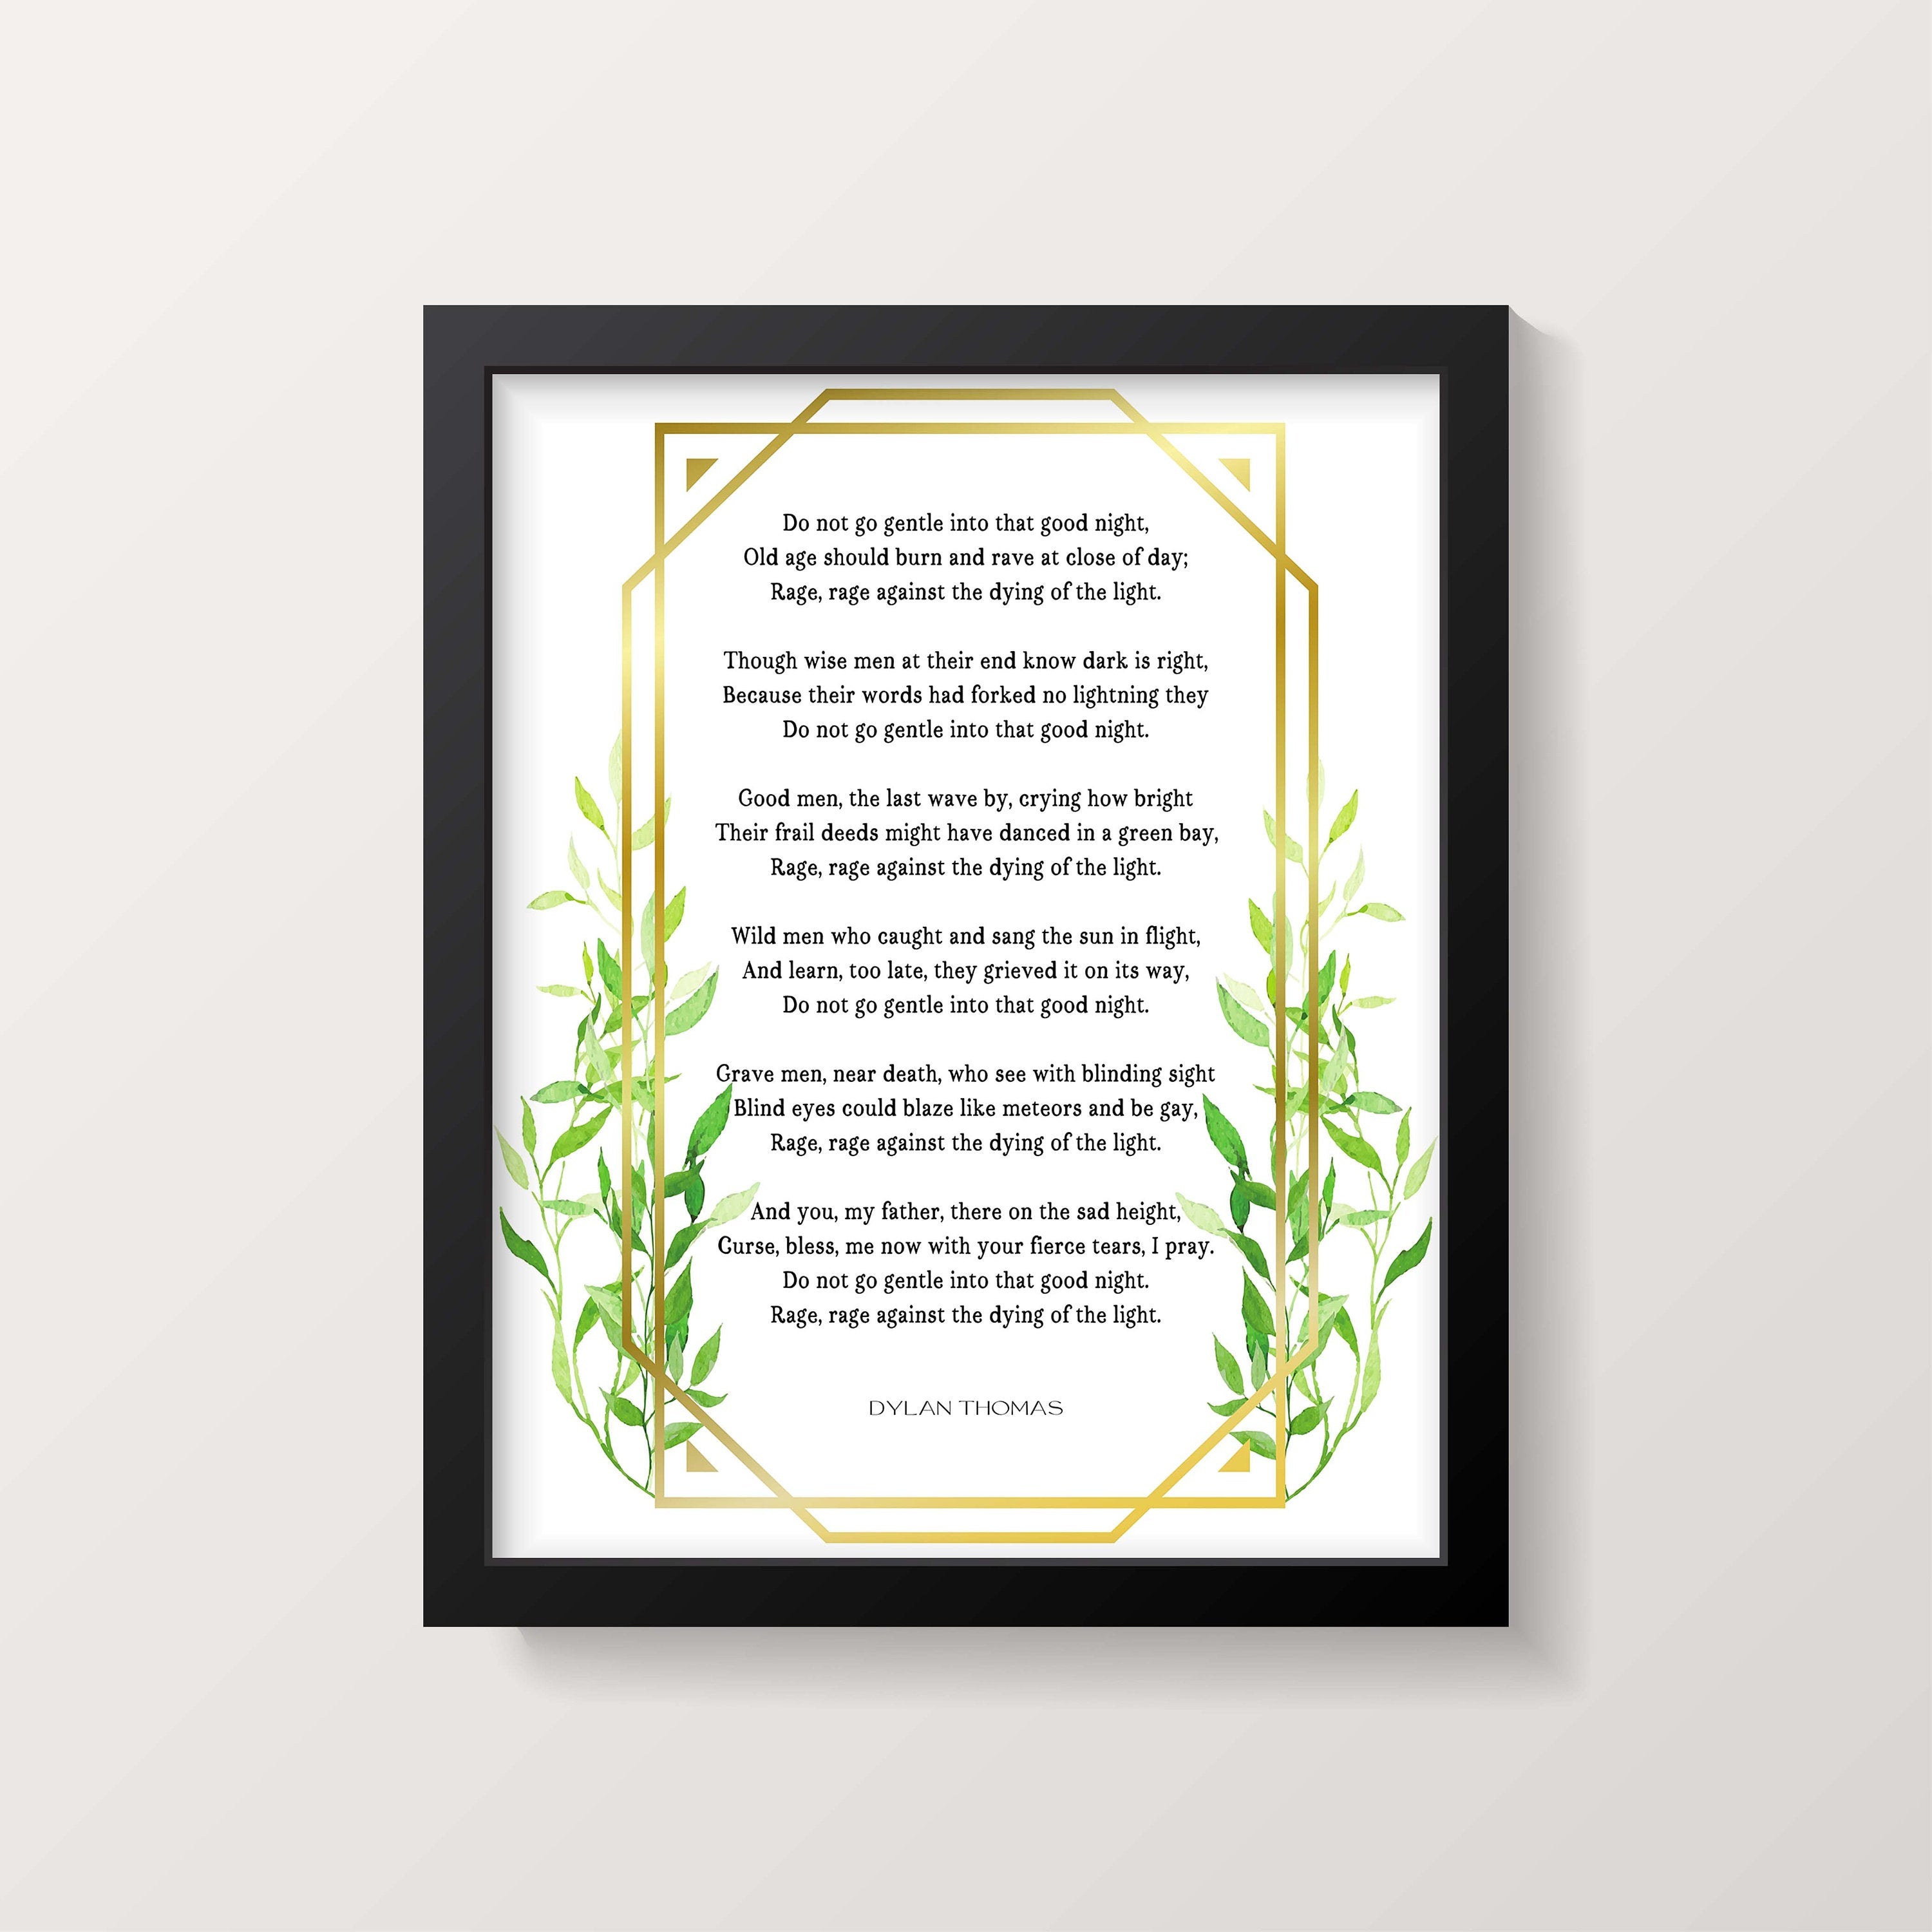 Dylan Thomas Poem Do Not Go Gentle Into That Good Night Wall Art Prints